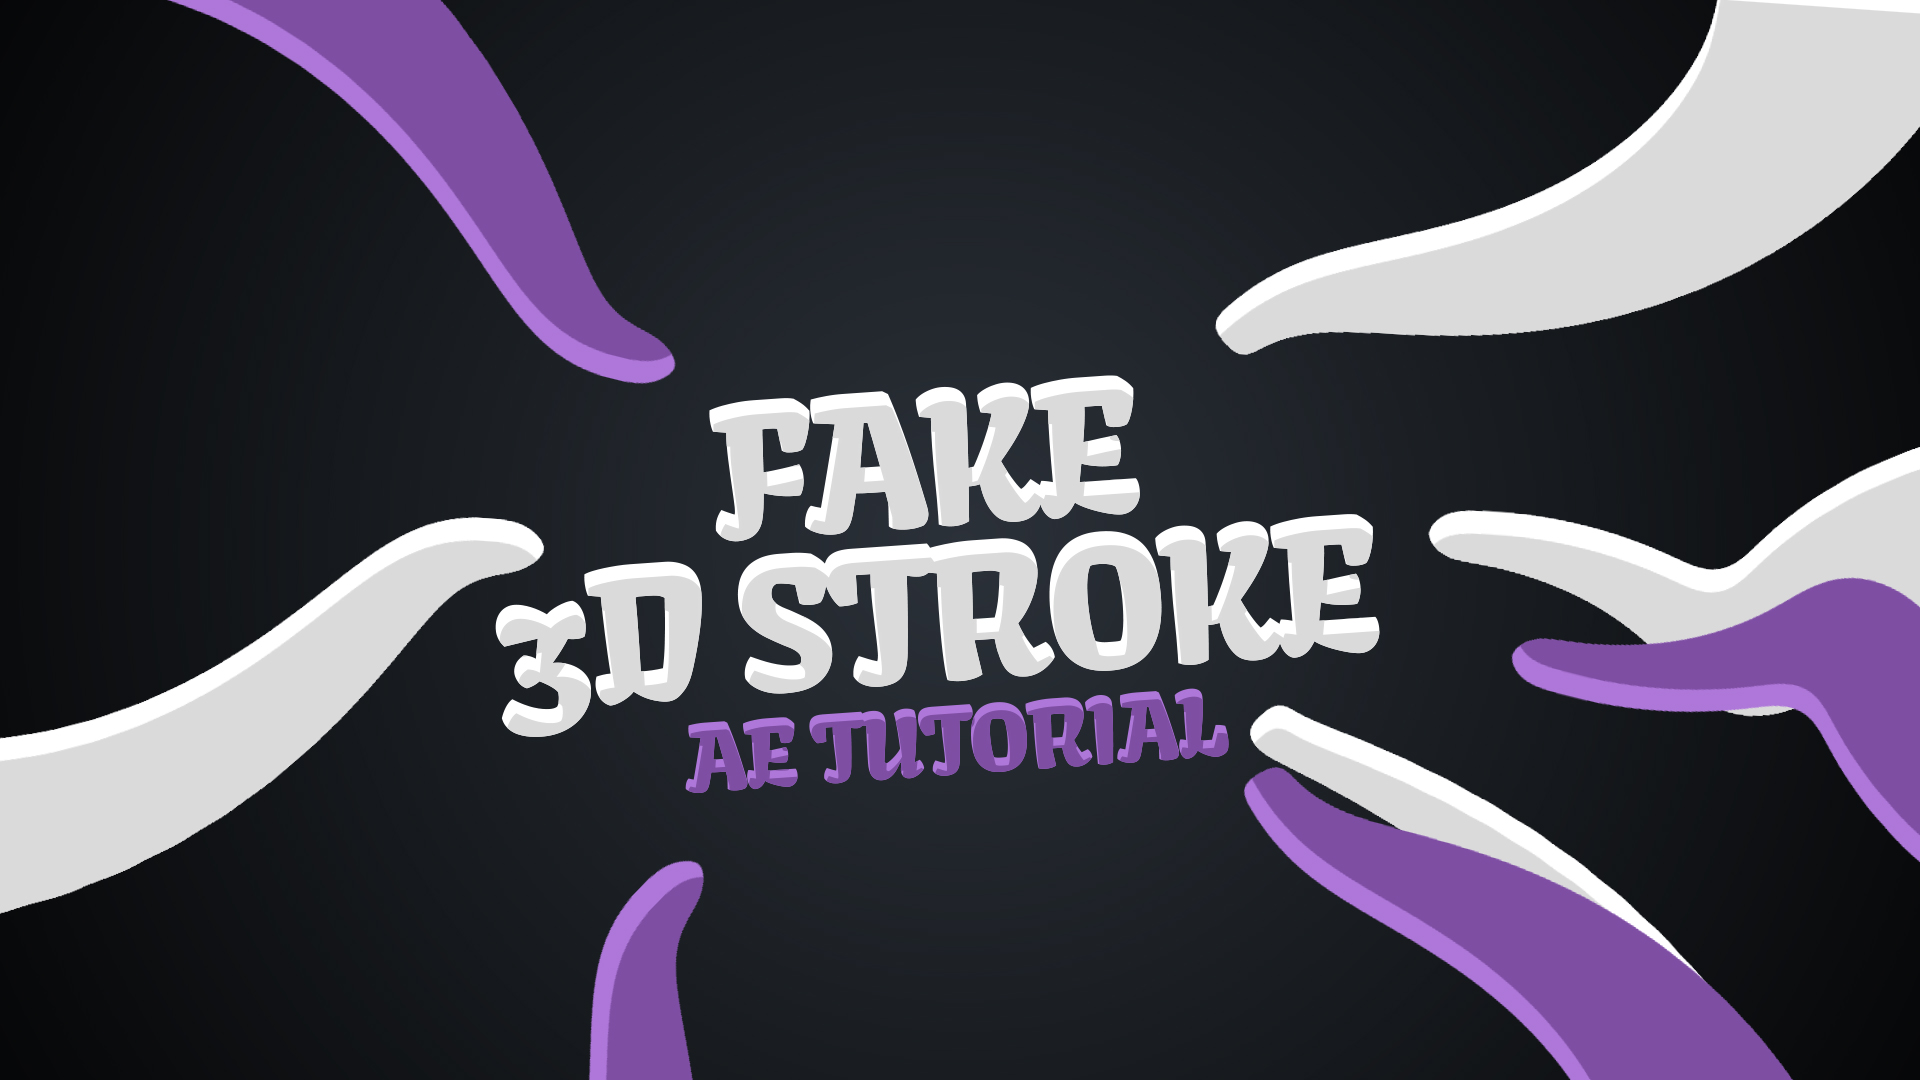 3d stroke after effects plug in